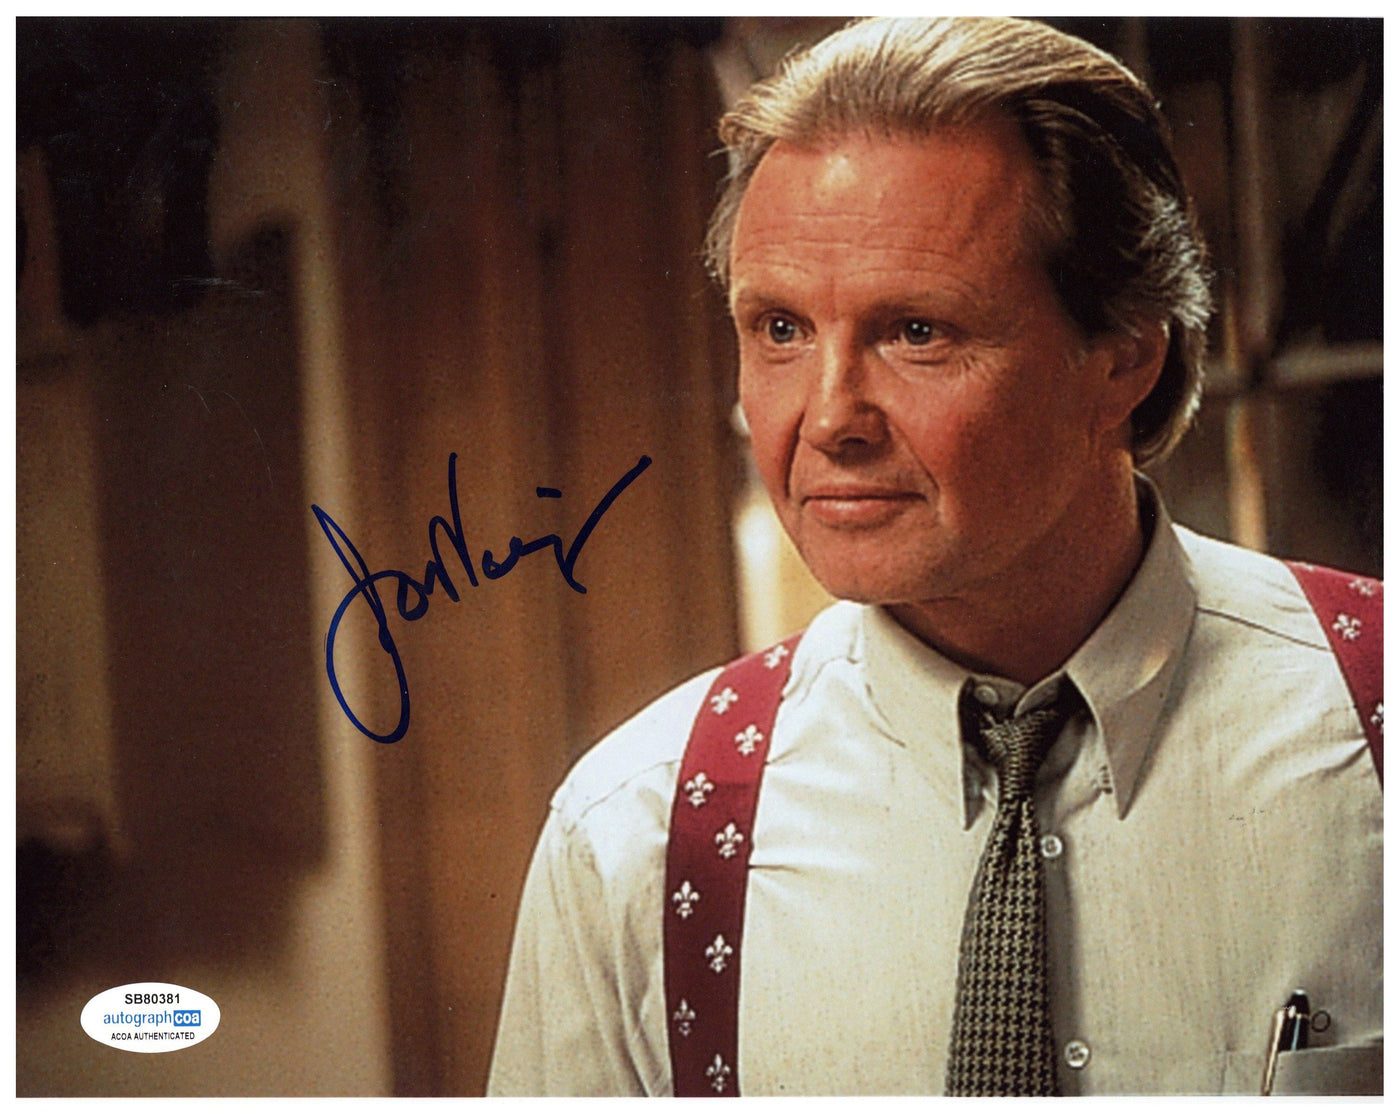 Jon Voight Signed 8x10 Photo Mission Impossible Autographed ACOA